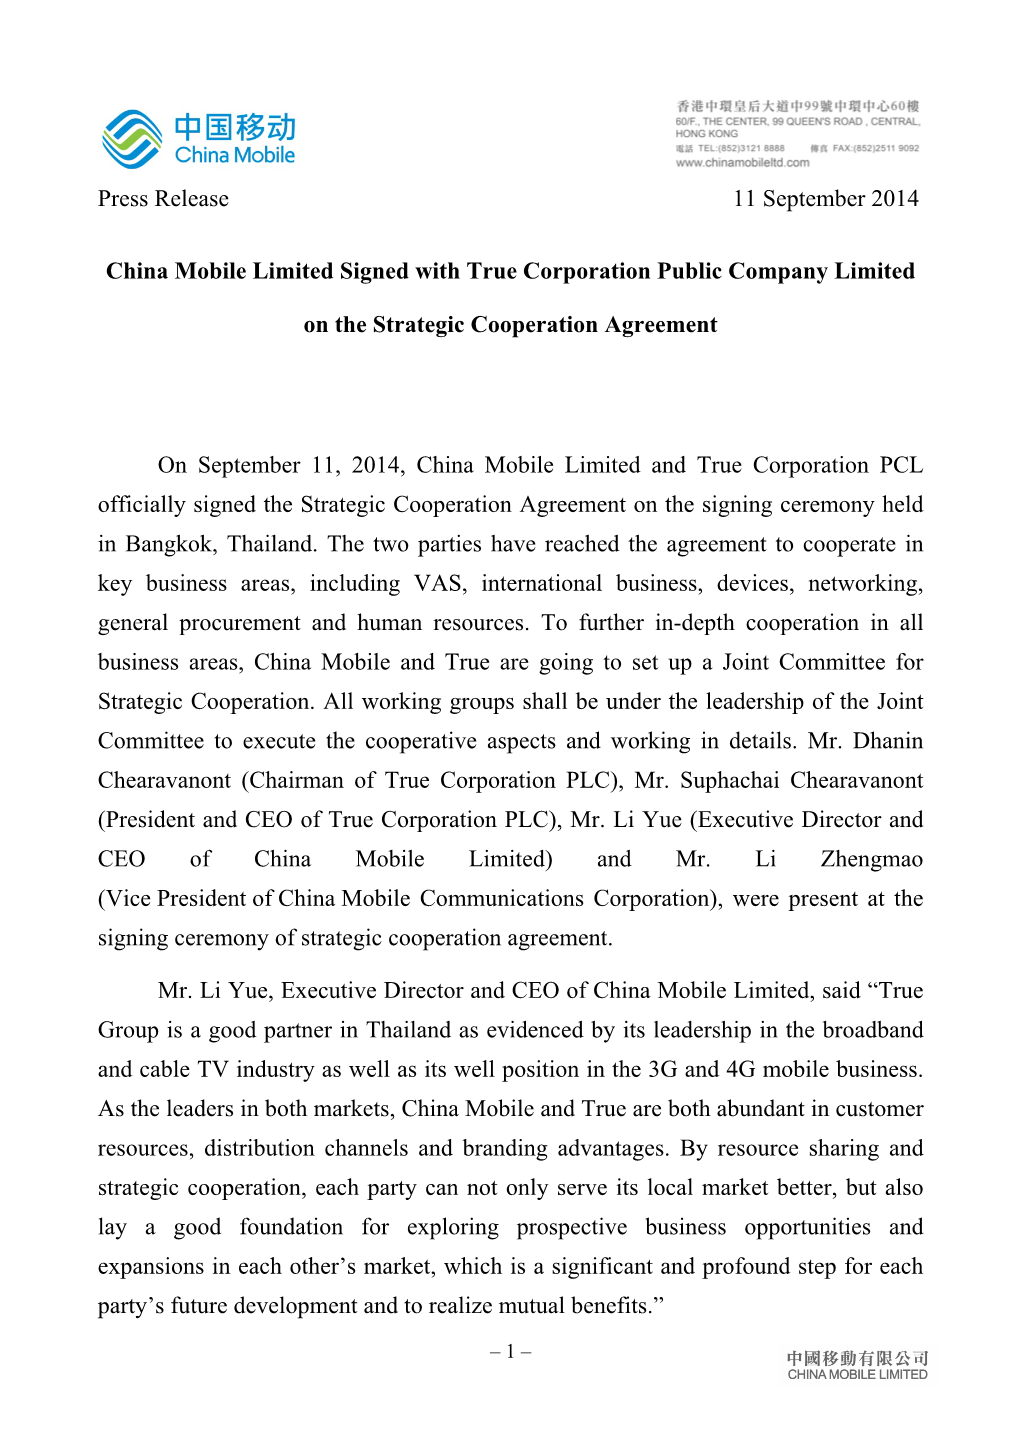 China Mobile Limited Signed with True Corporation Public Company Limited